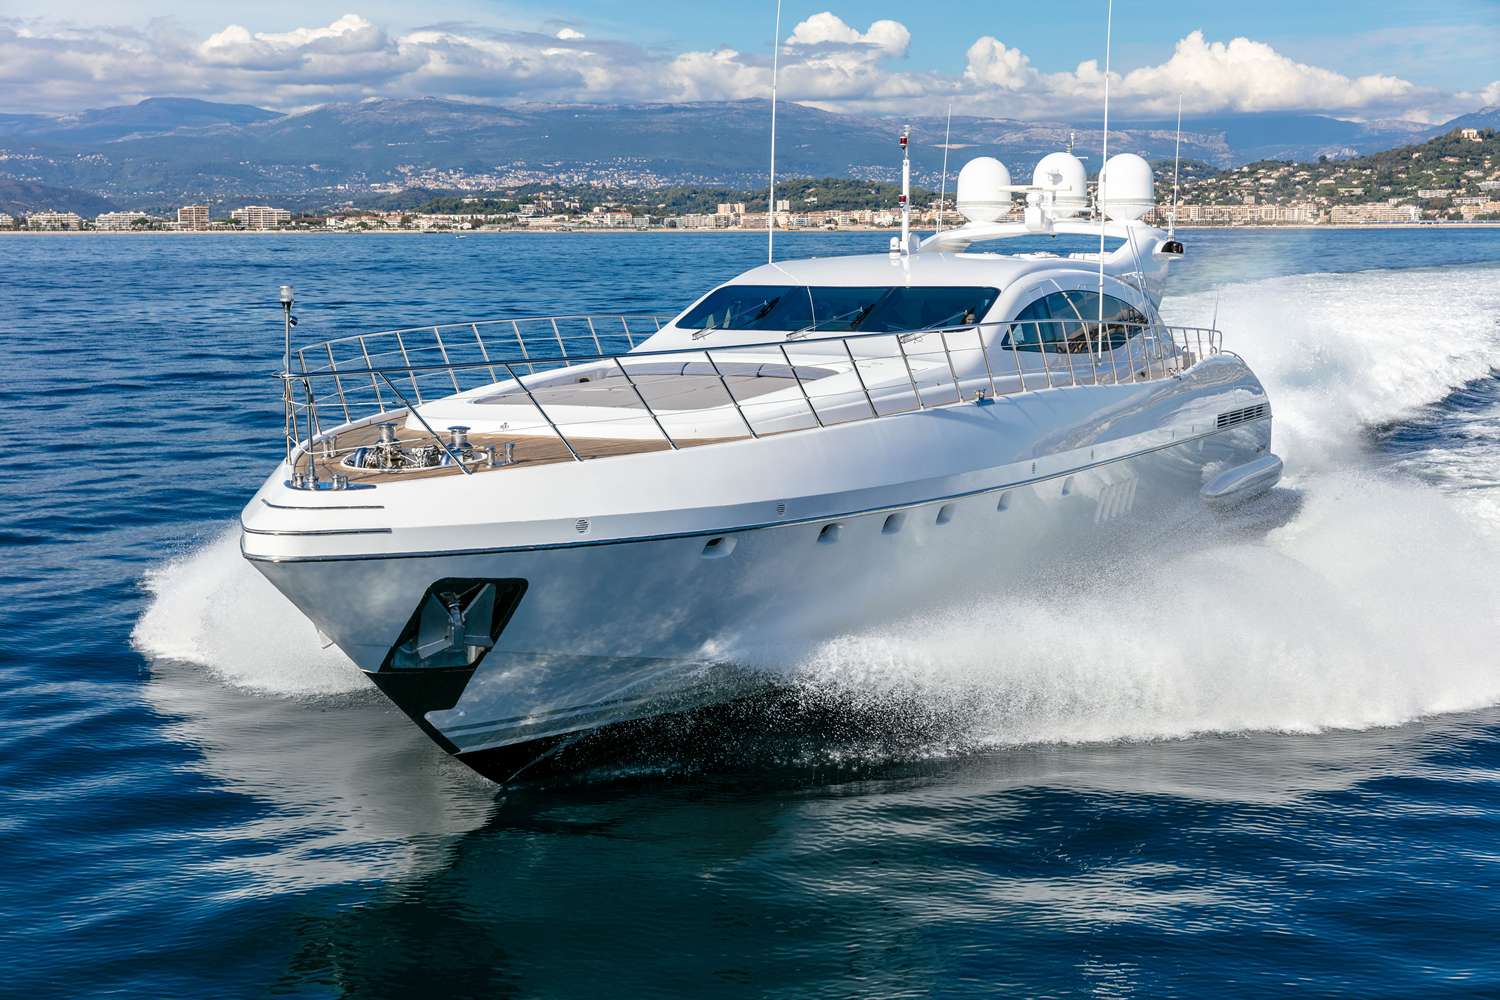 Bo - Yacht Charter Cannes & Boat hire in Fr. Riviera, Corsica & Sardinia 1